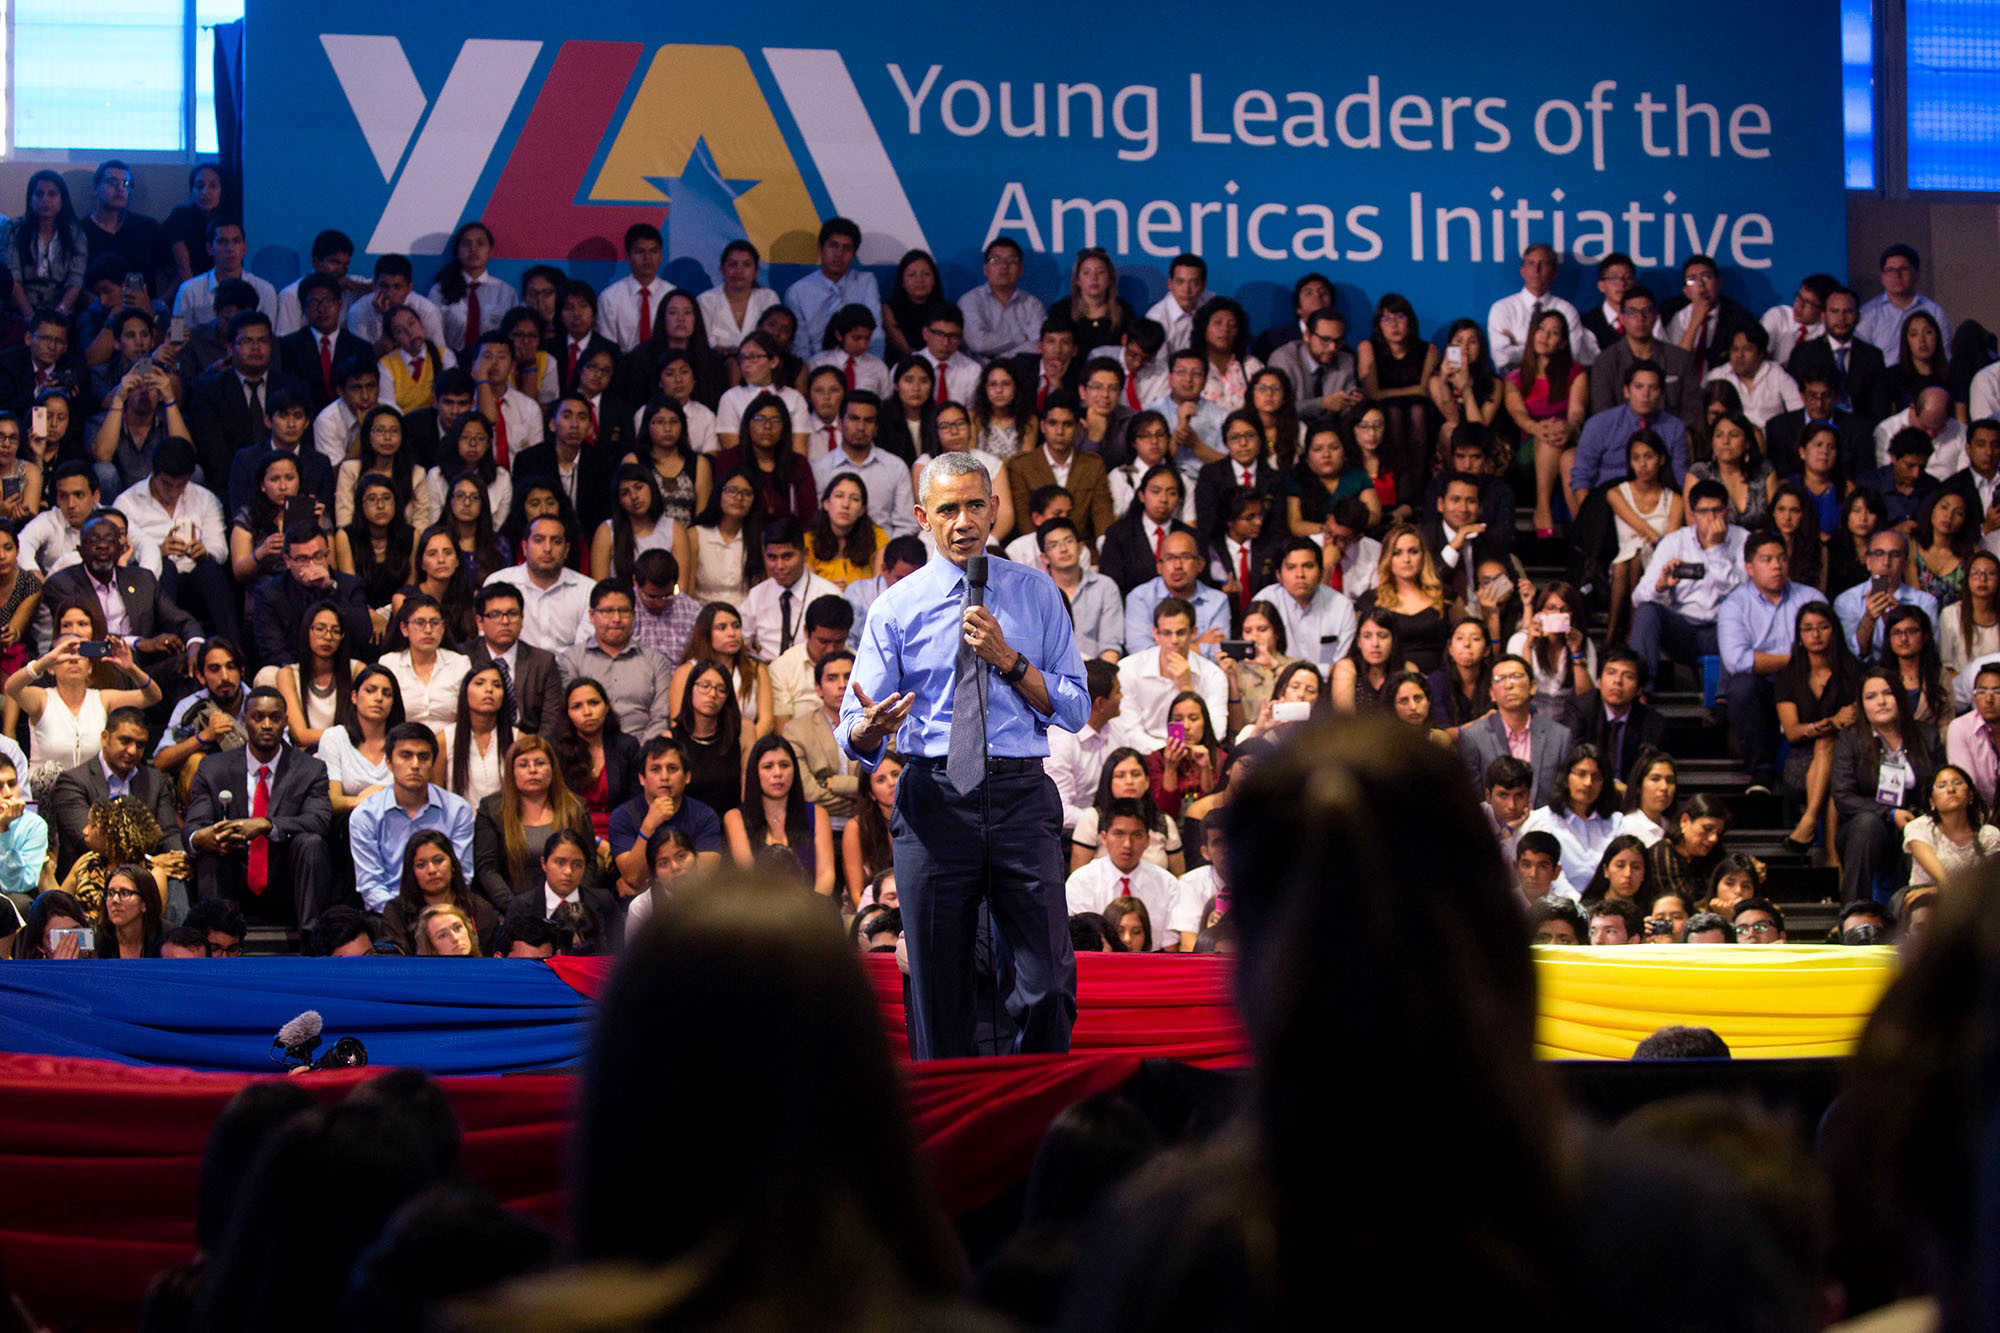 President Barack Obama participates in the Young Leaders of the Americas Initiative (YLAI) town hall at the Pontifical Catholic University of Peru in Lima, Peru, Nov. 19, 2016. (Official White House Photo by Chuck Kennedy)